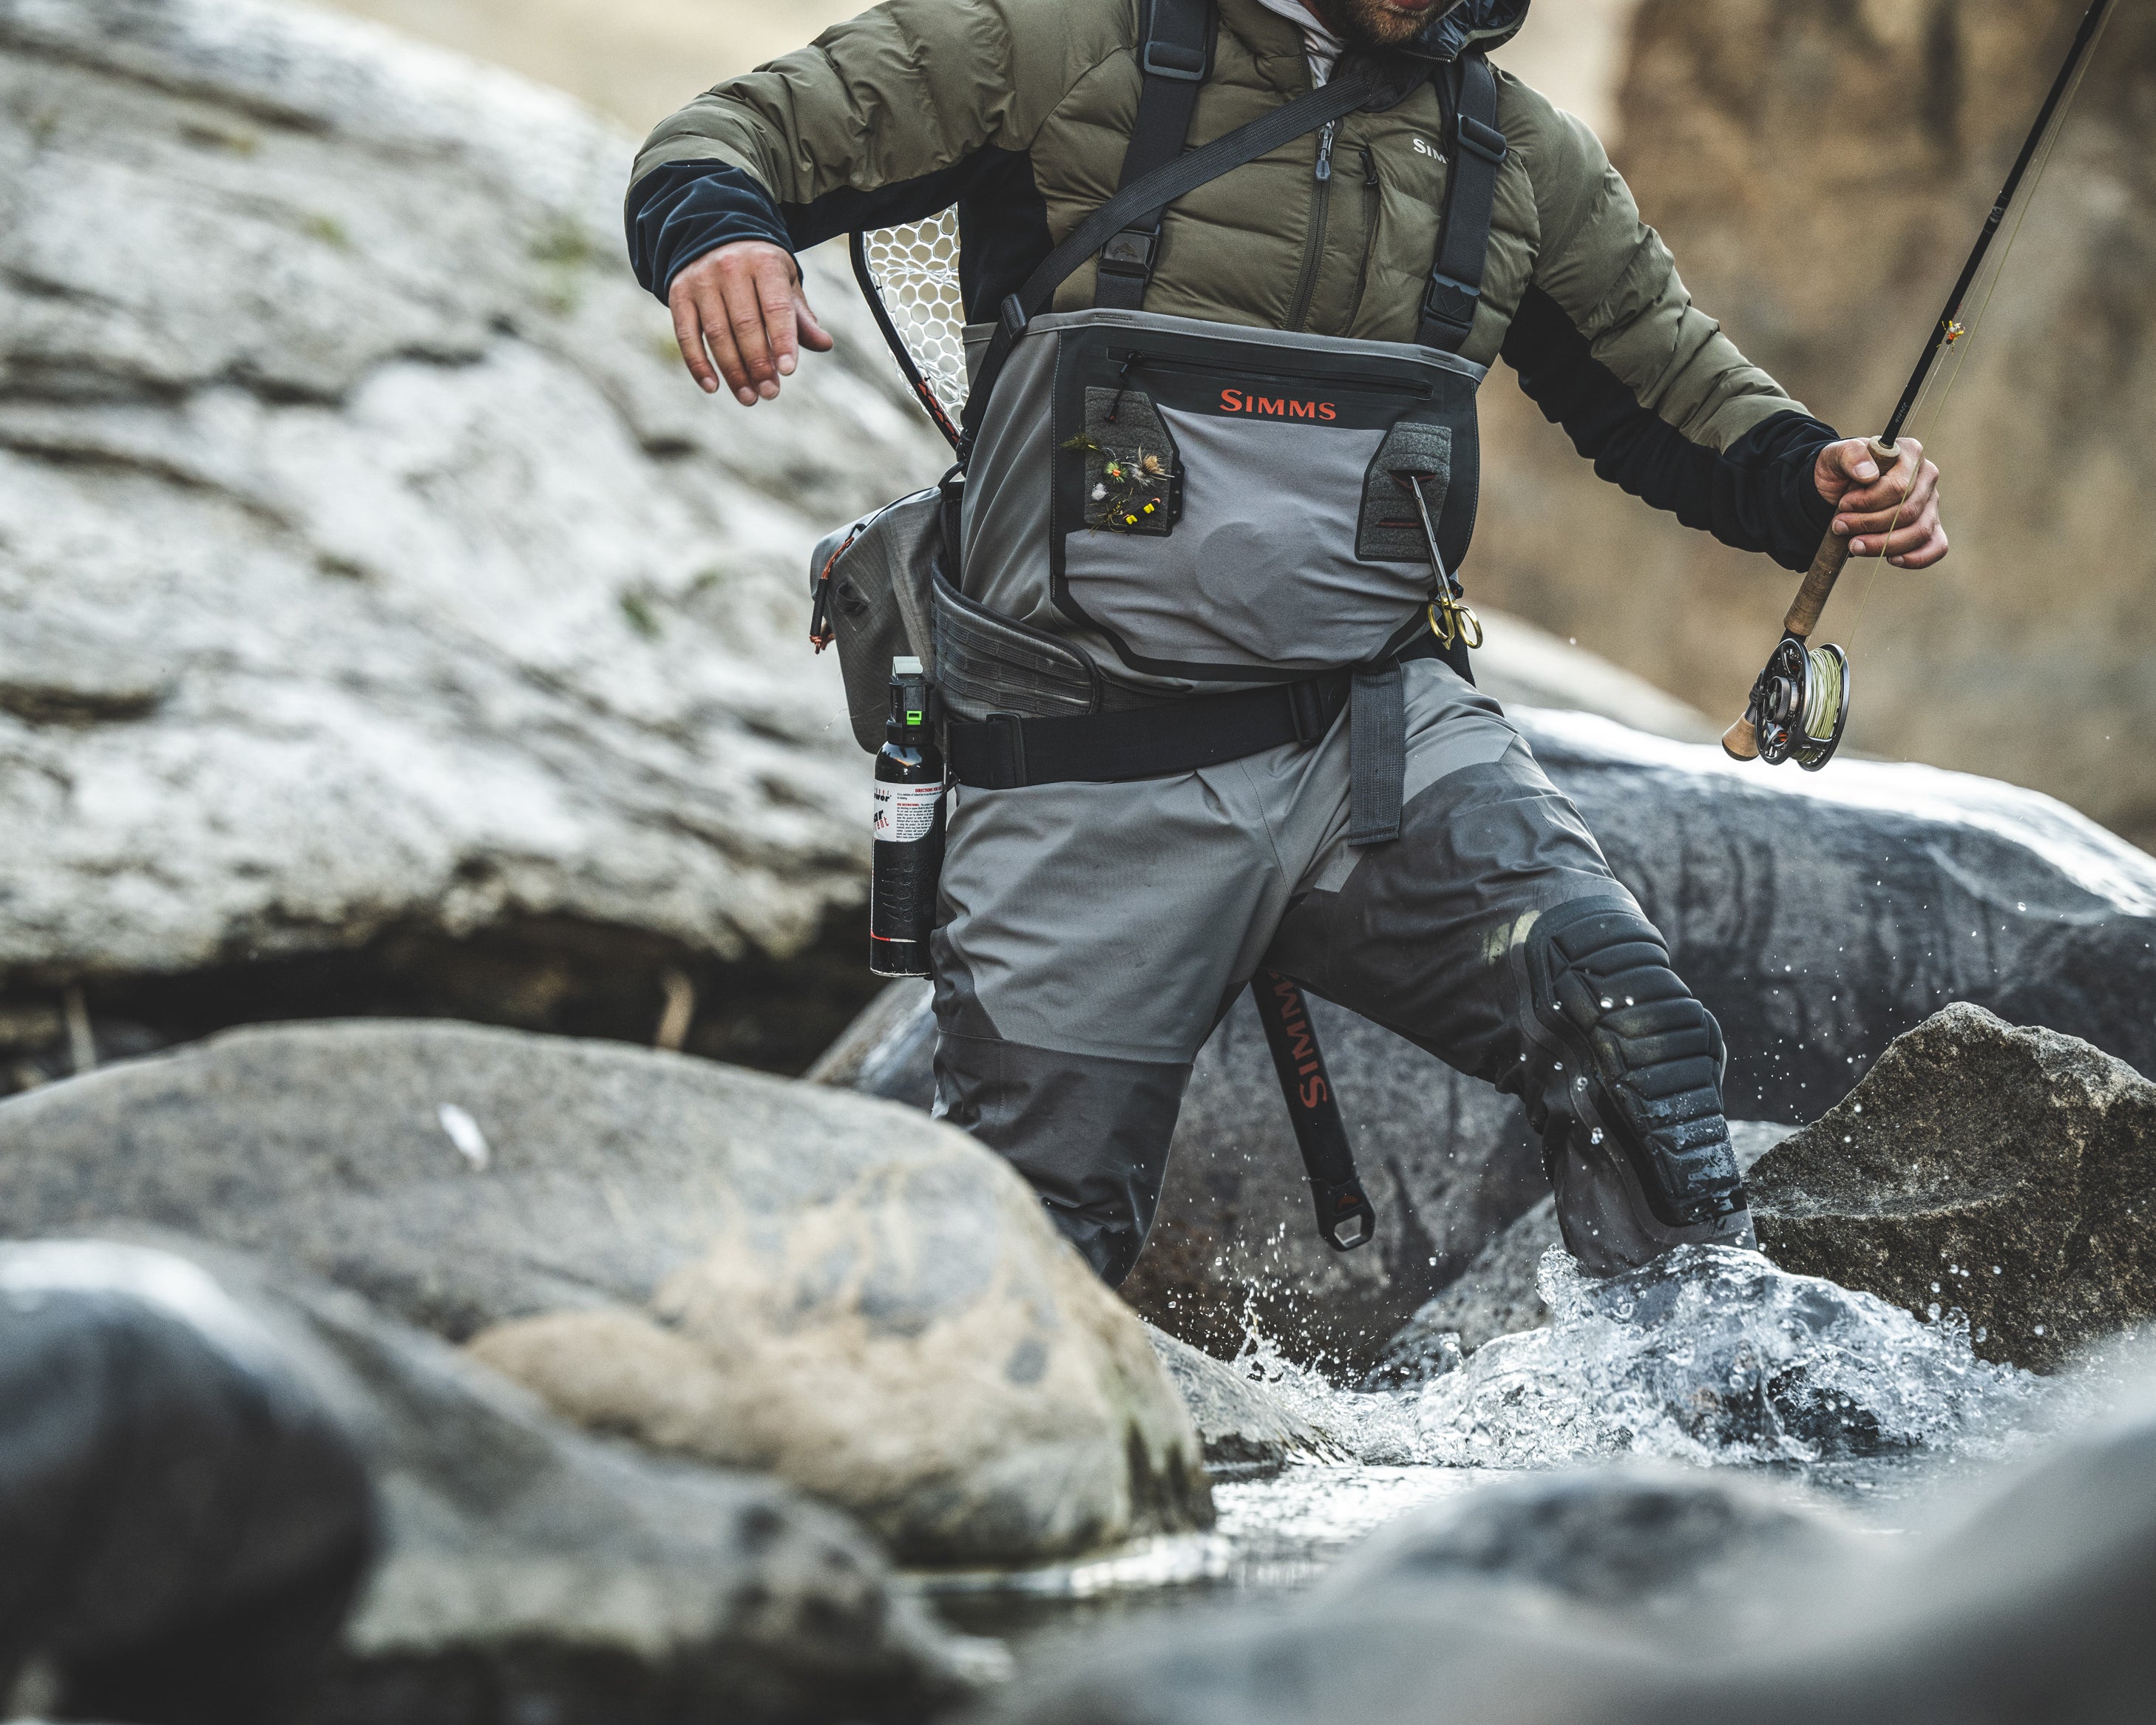 Fall Fly Fishing Gear Guide — TCO Fly Shop